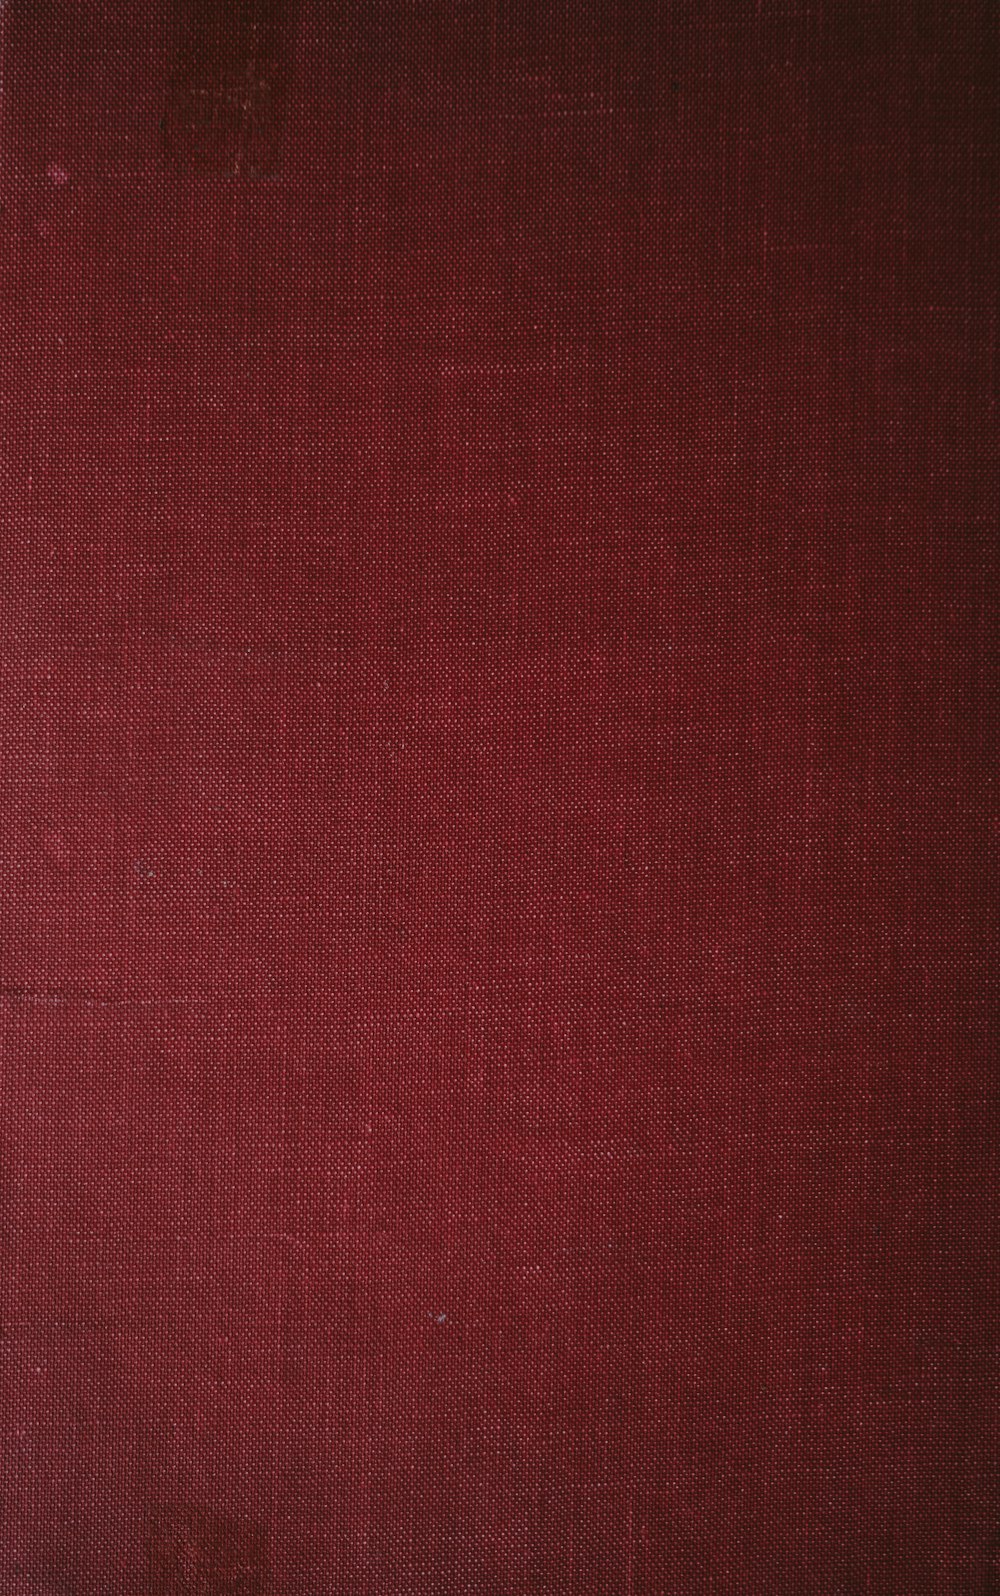 a close up of a red book cover